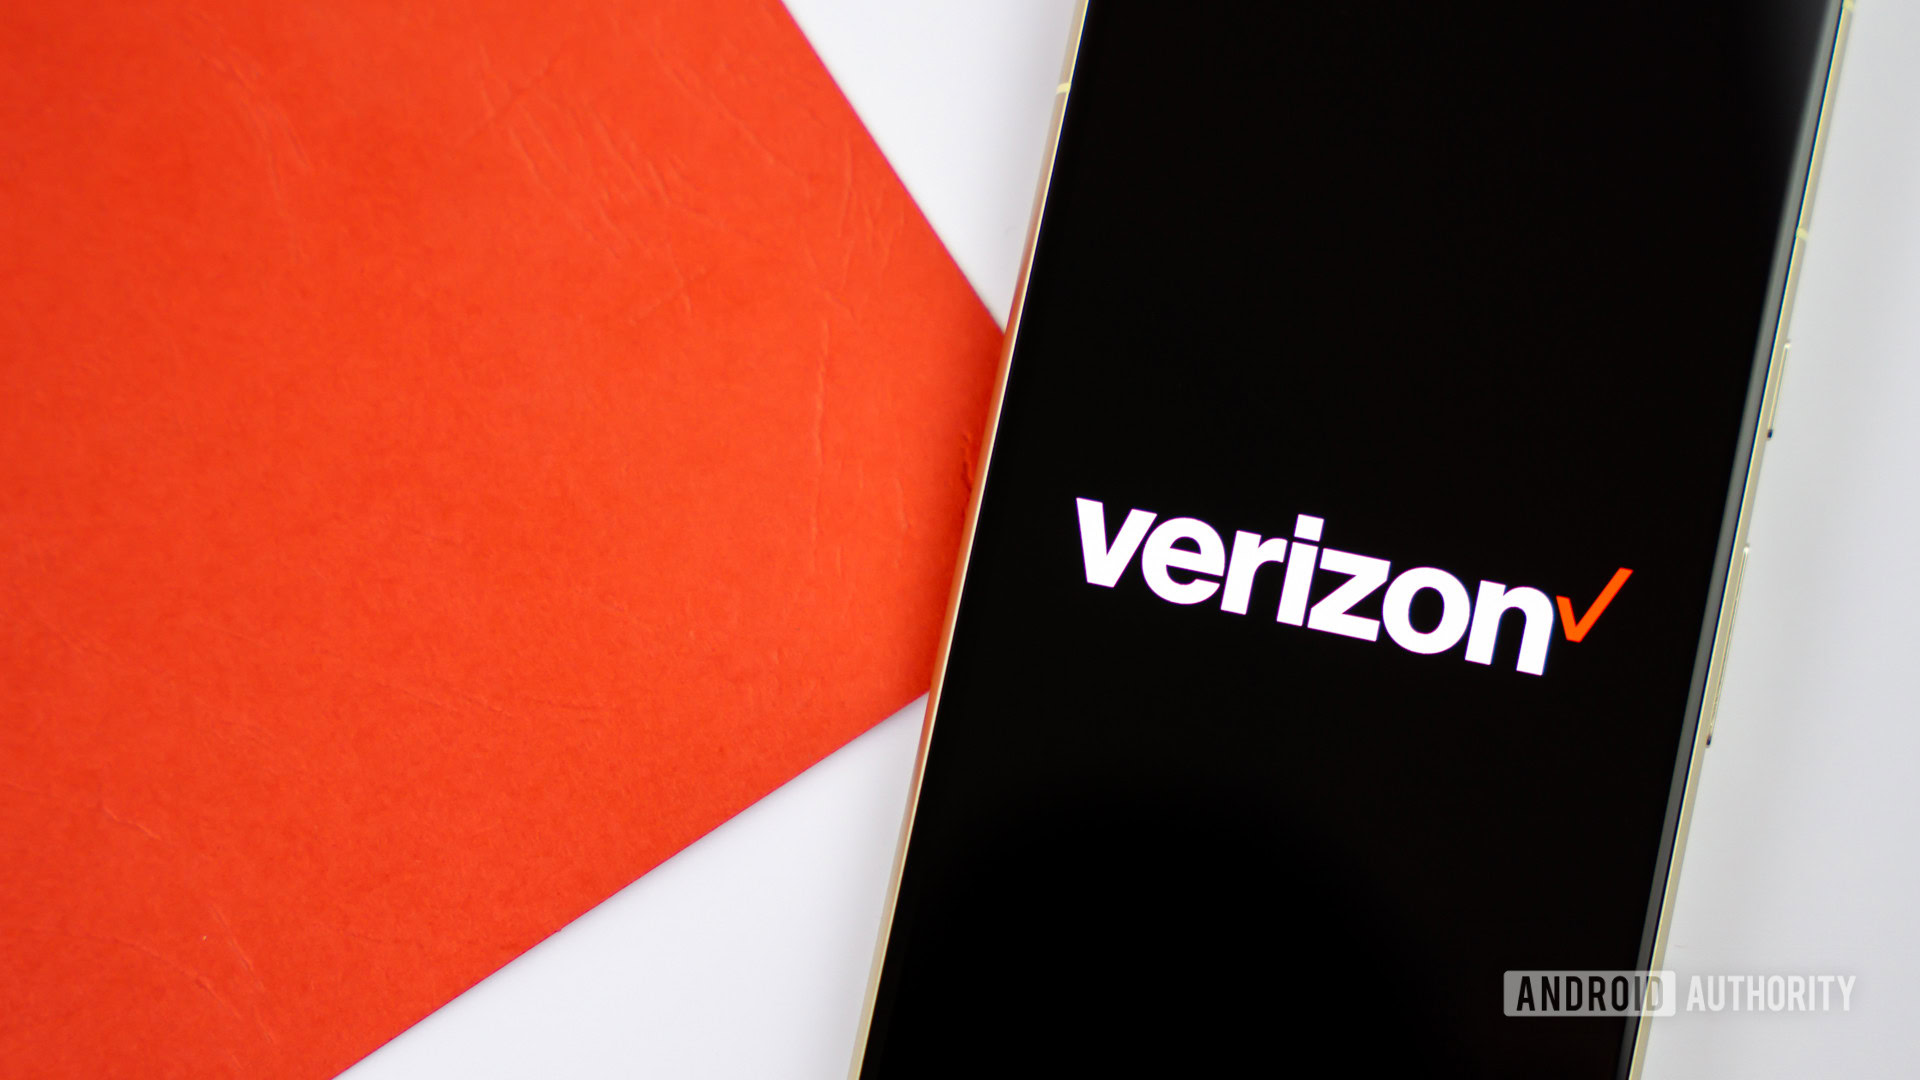 Verizon logo on smartphone with a colored background Stock photo 8